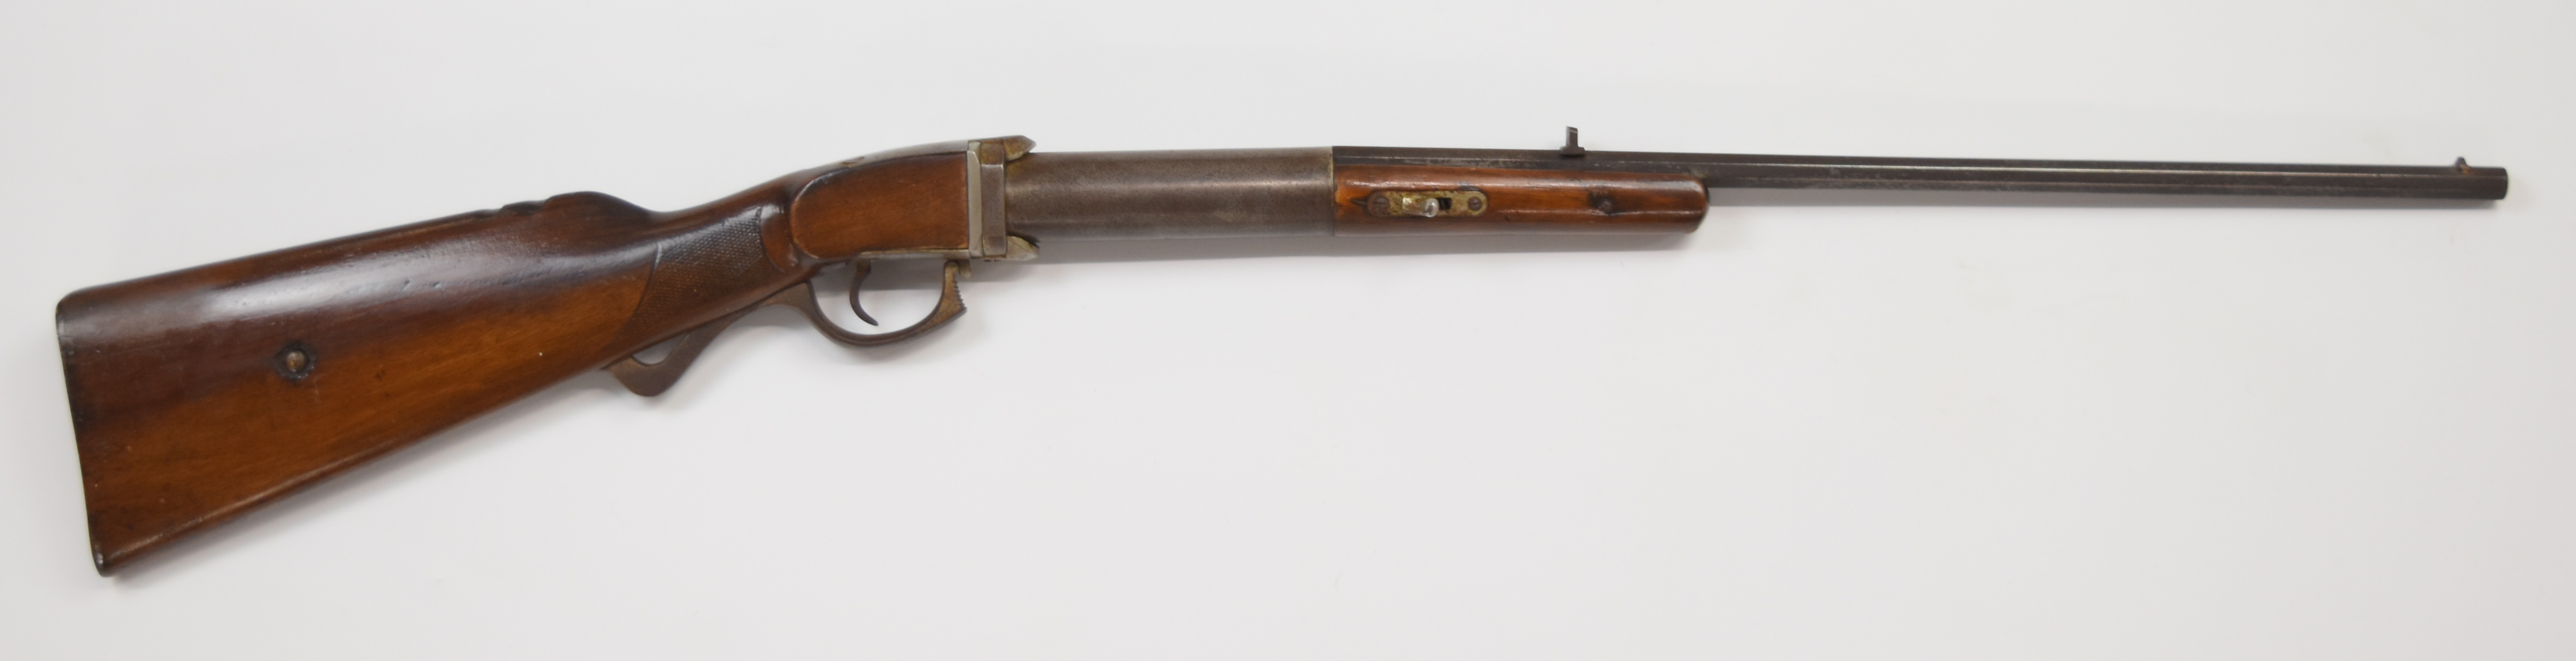 Oscar Will Bugelspanner .22 air rifle with trigger guard under-lever, chequered grip, metal butt - Image 2 of 9